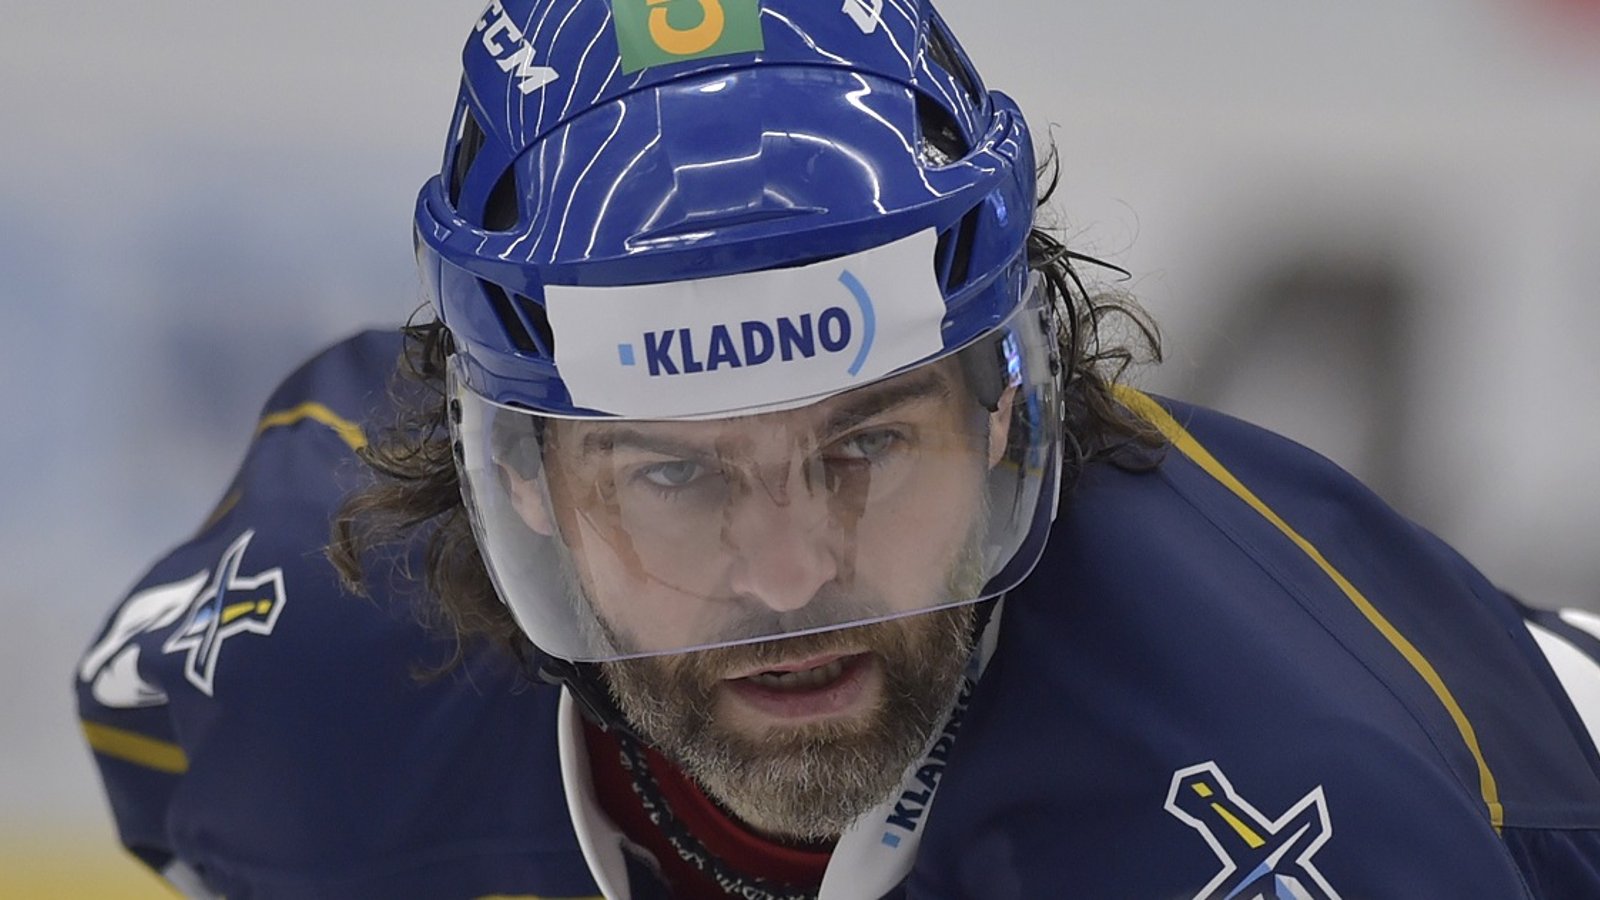 Jaromir Jagr continues to steal the show at 49 years old.